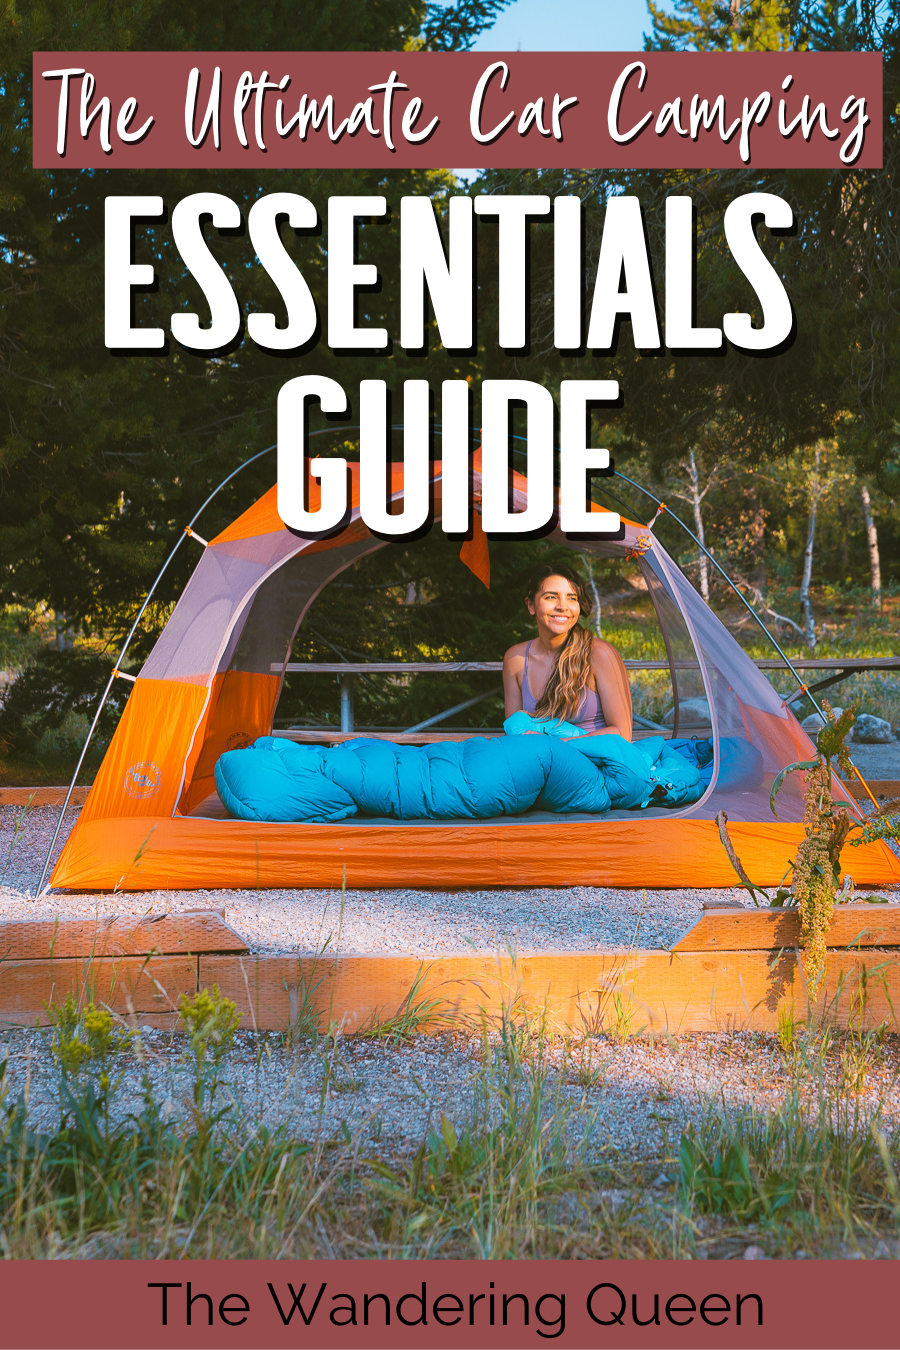 Car Camping Checklist—Camping essentials you can't leave home